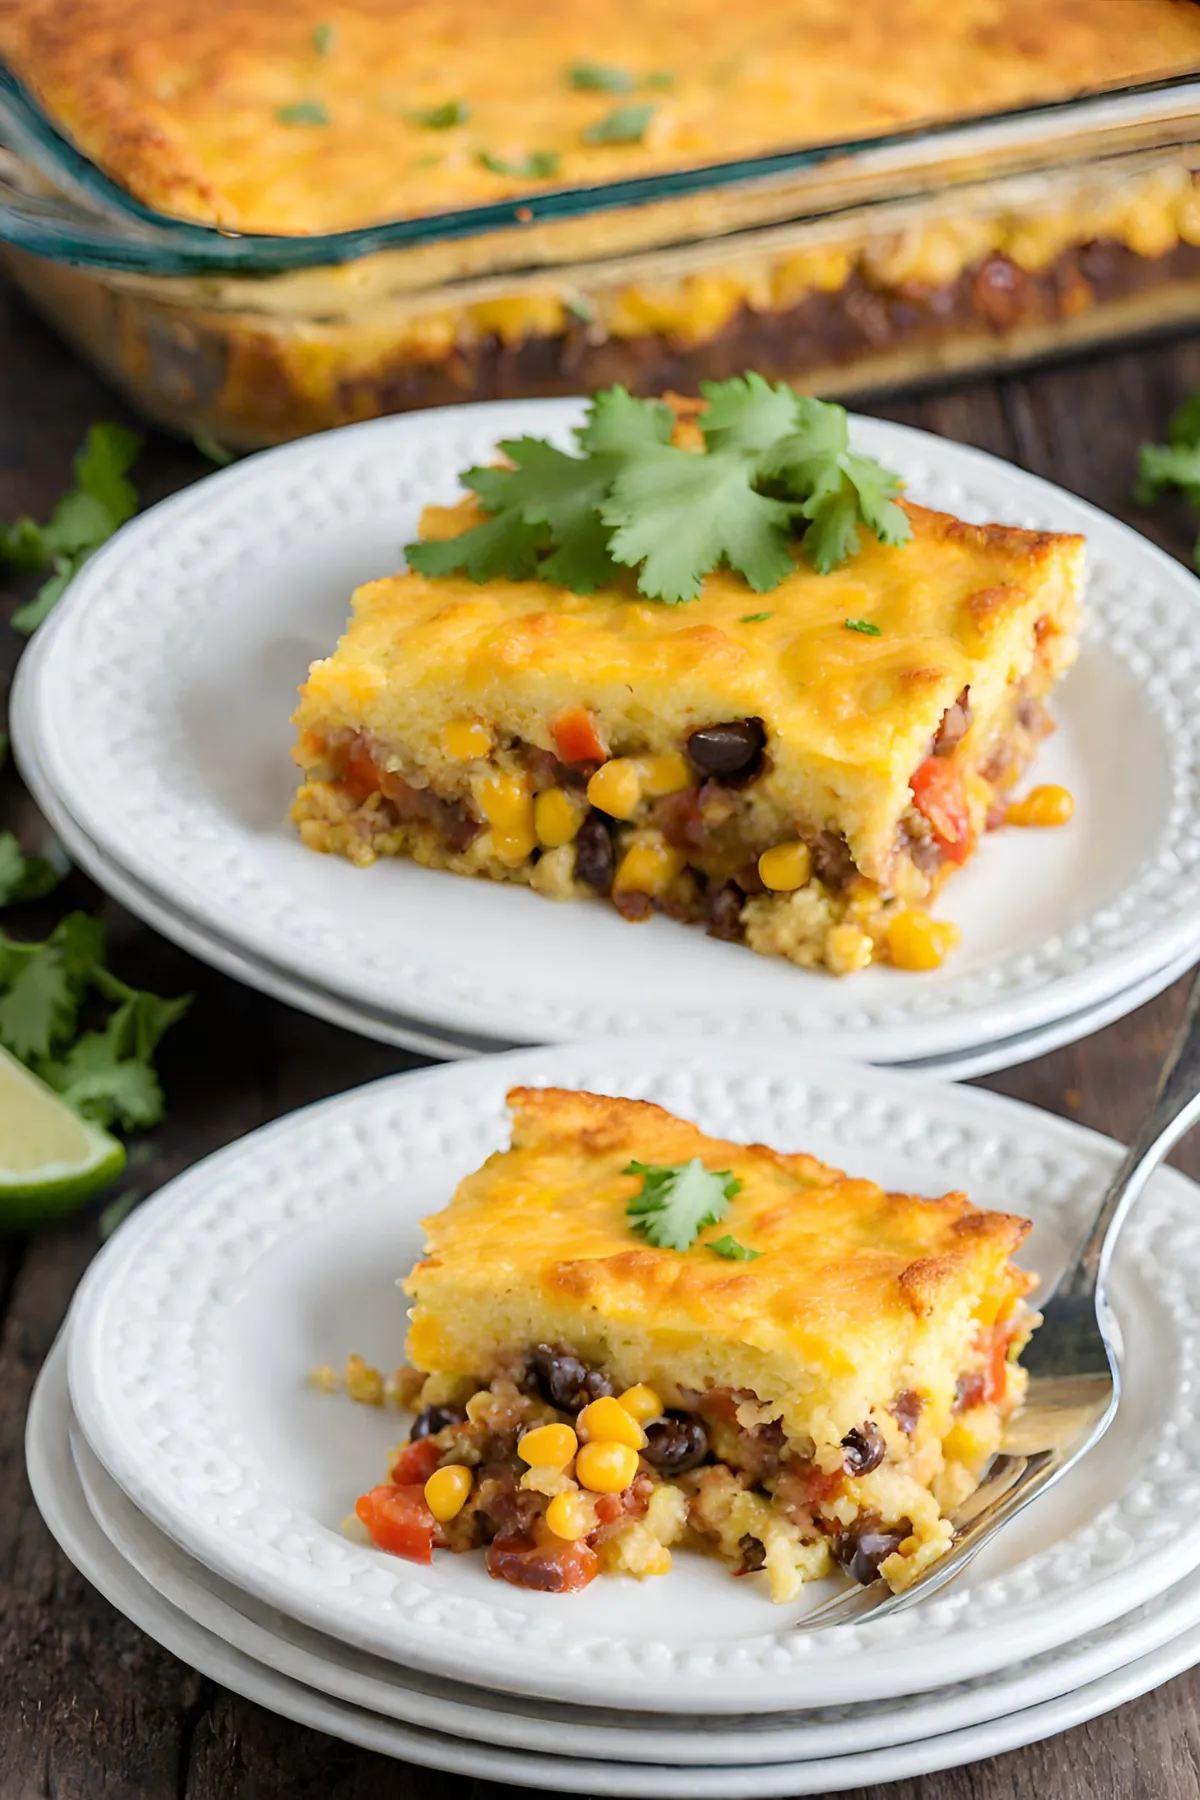 Serving Suggestions for Mexican Cornbread Casserole